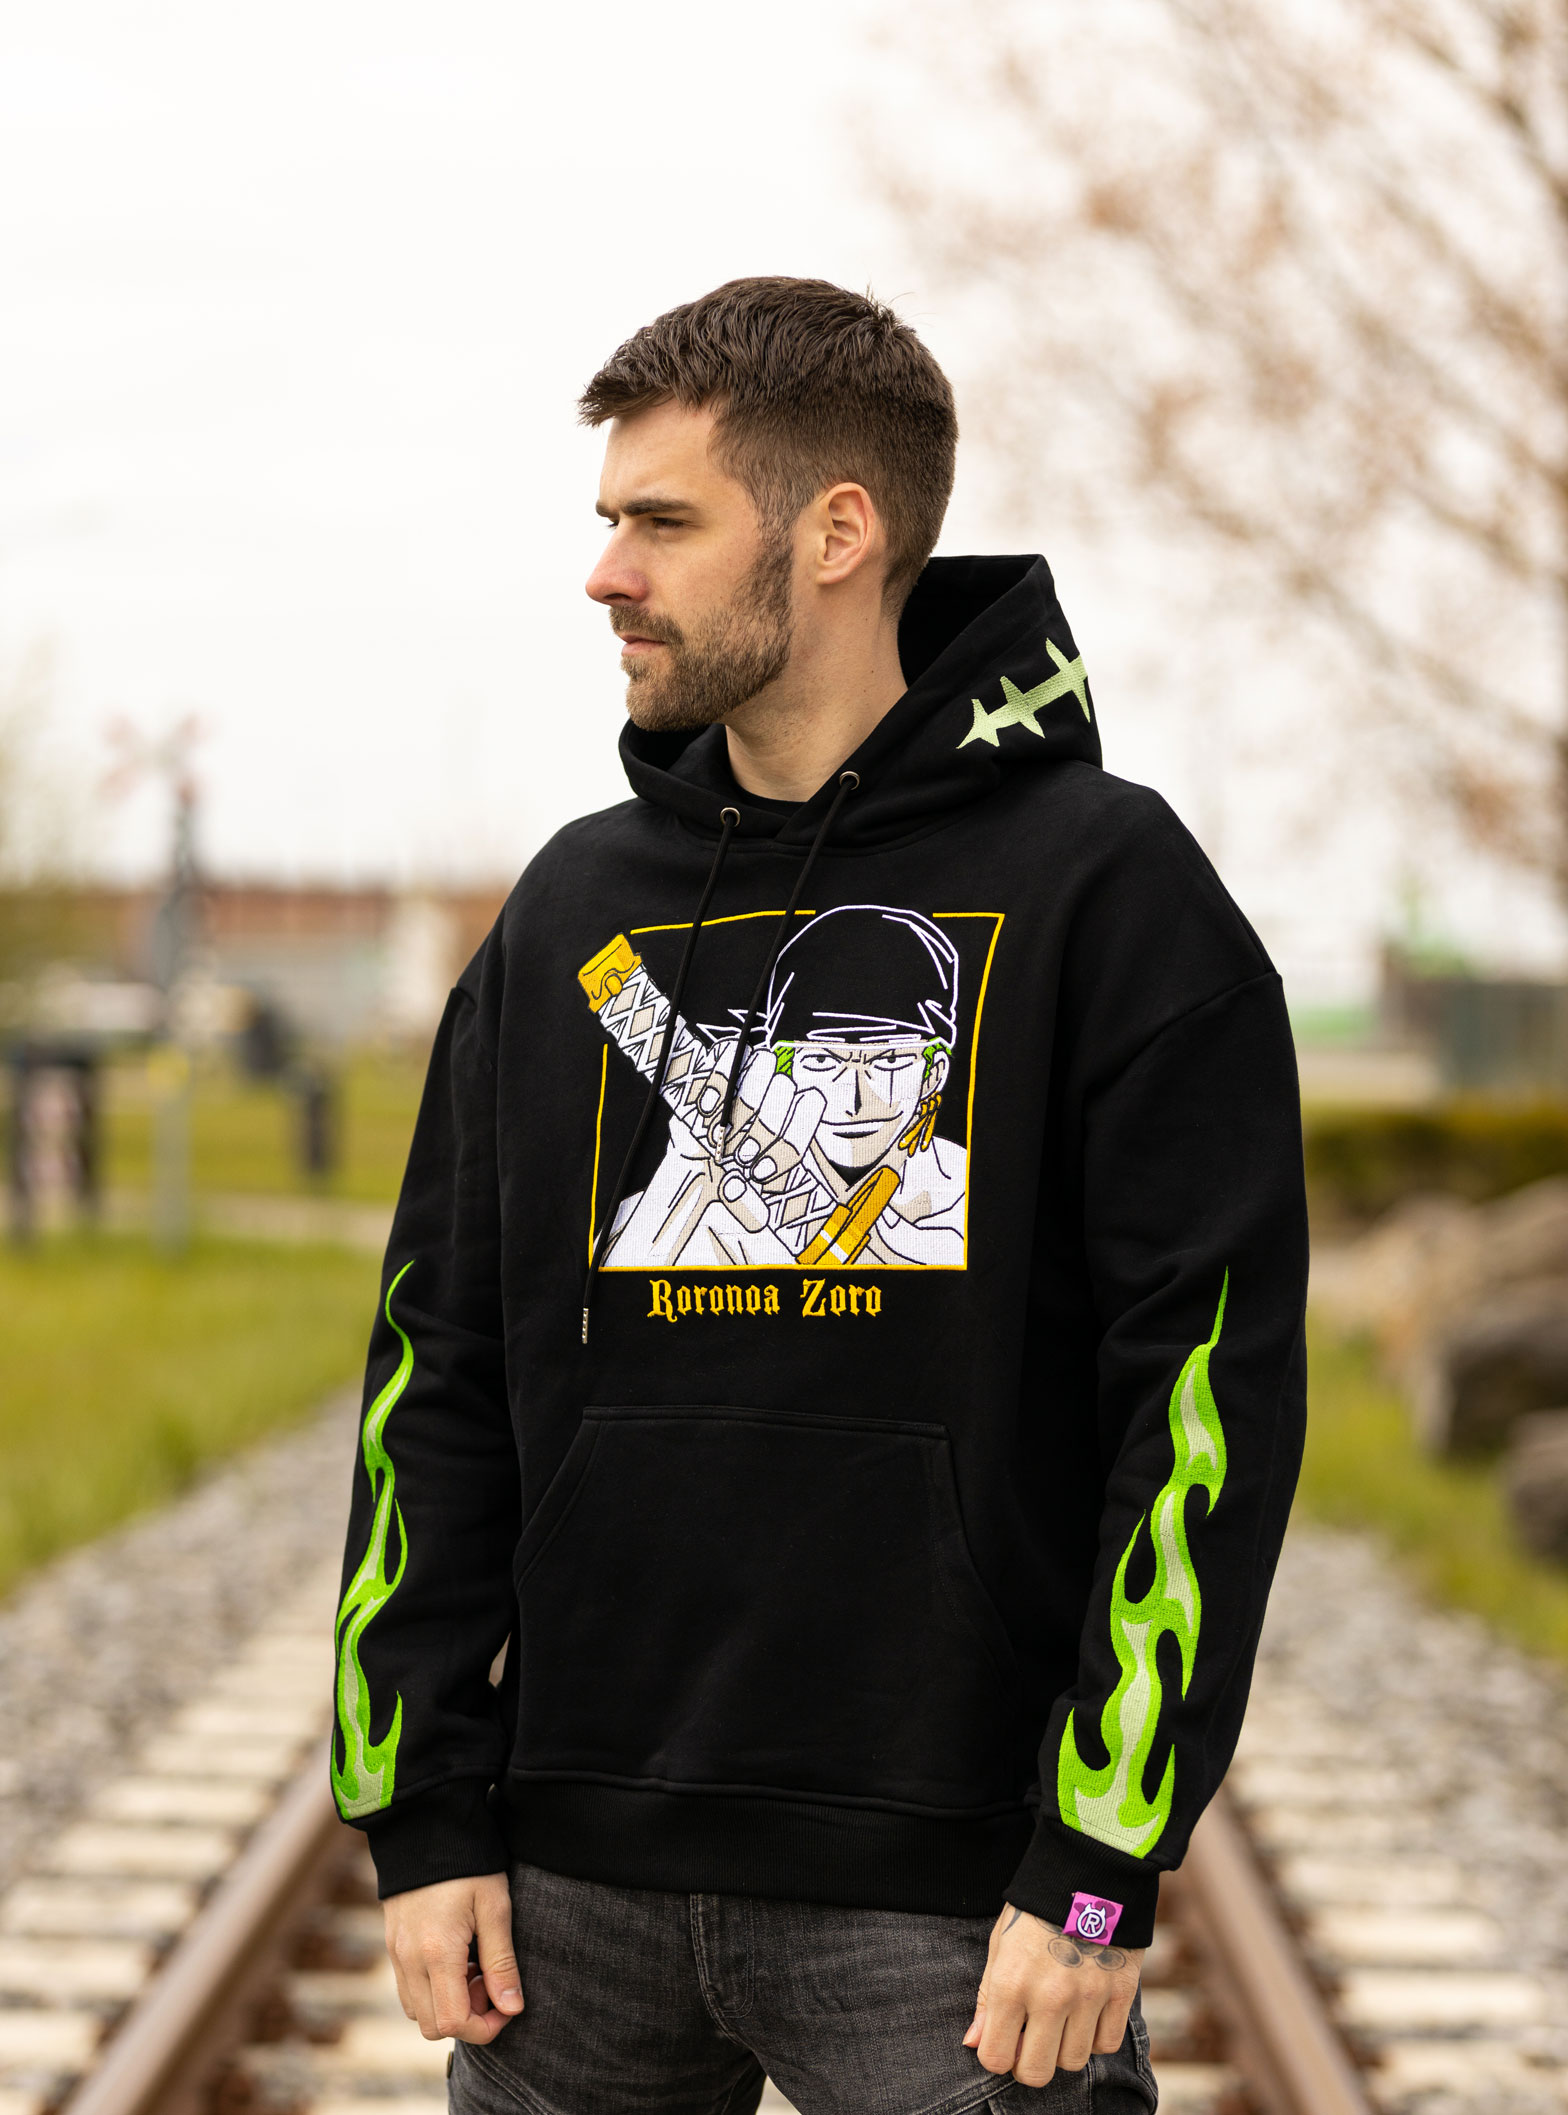 Zoro one piece embroidered hoodie. Limited edition embroidery work.